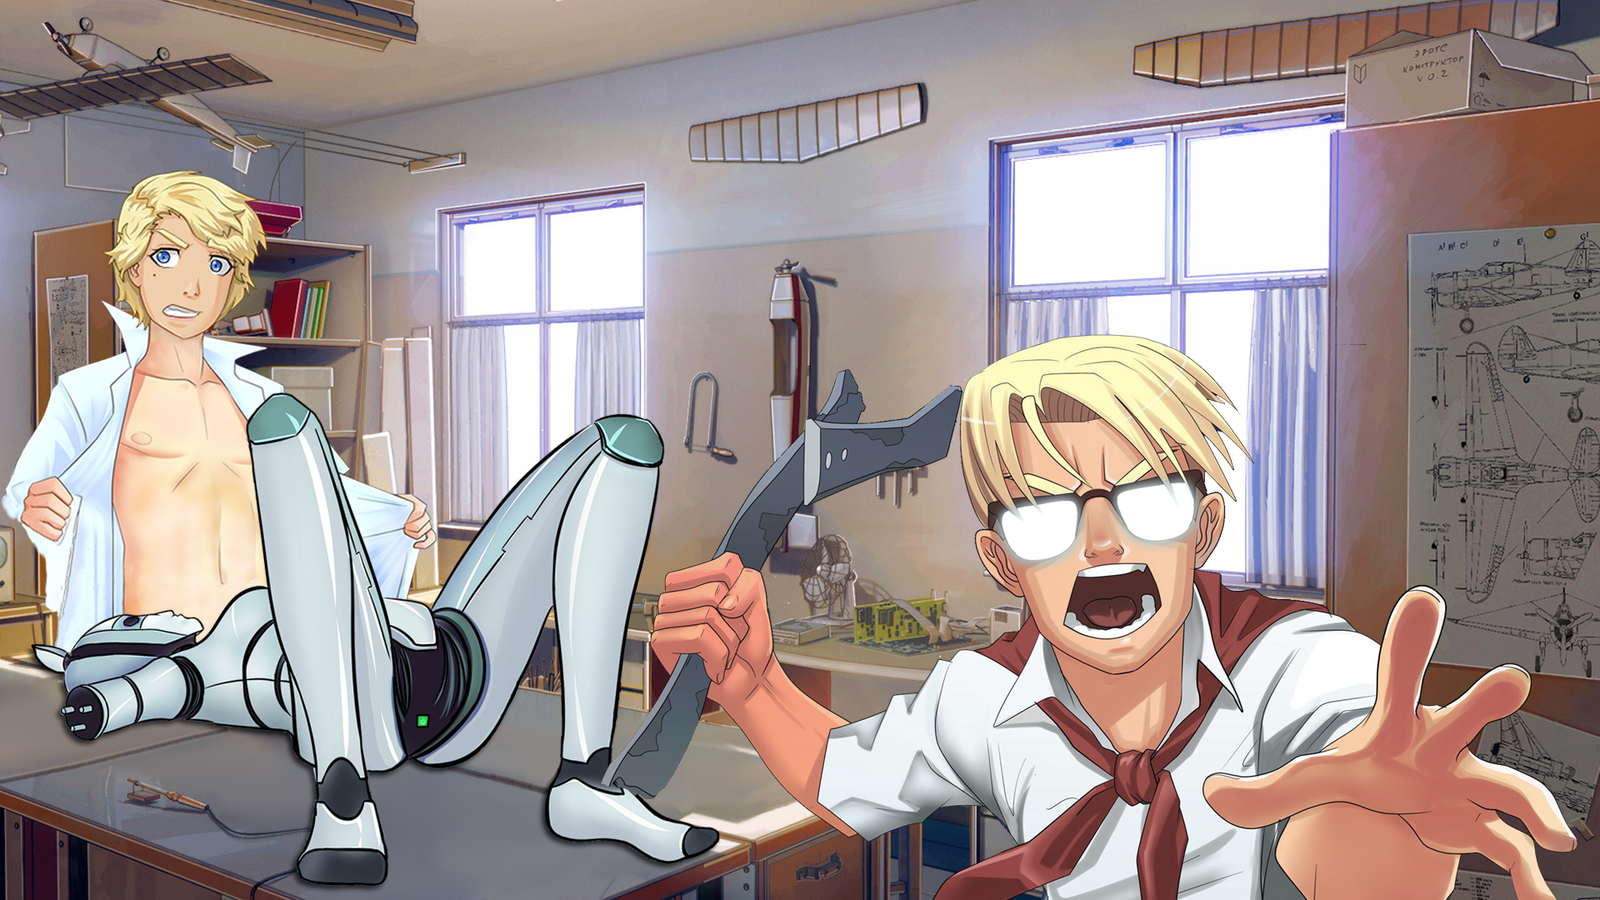 Don't stop scientists from doing science! - Endless summer, Visual novel, Shurik, Electronic, , Old camp